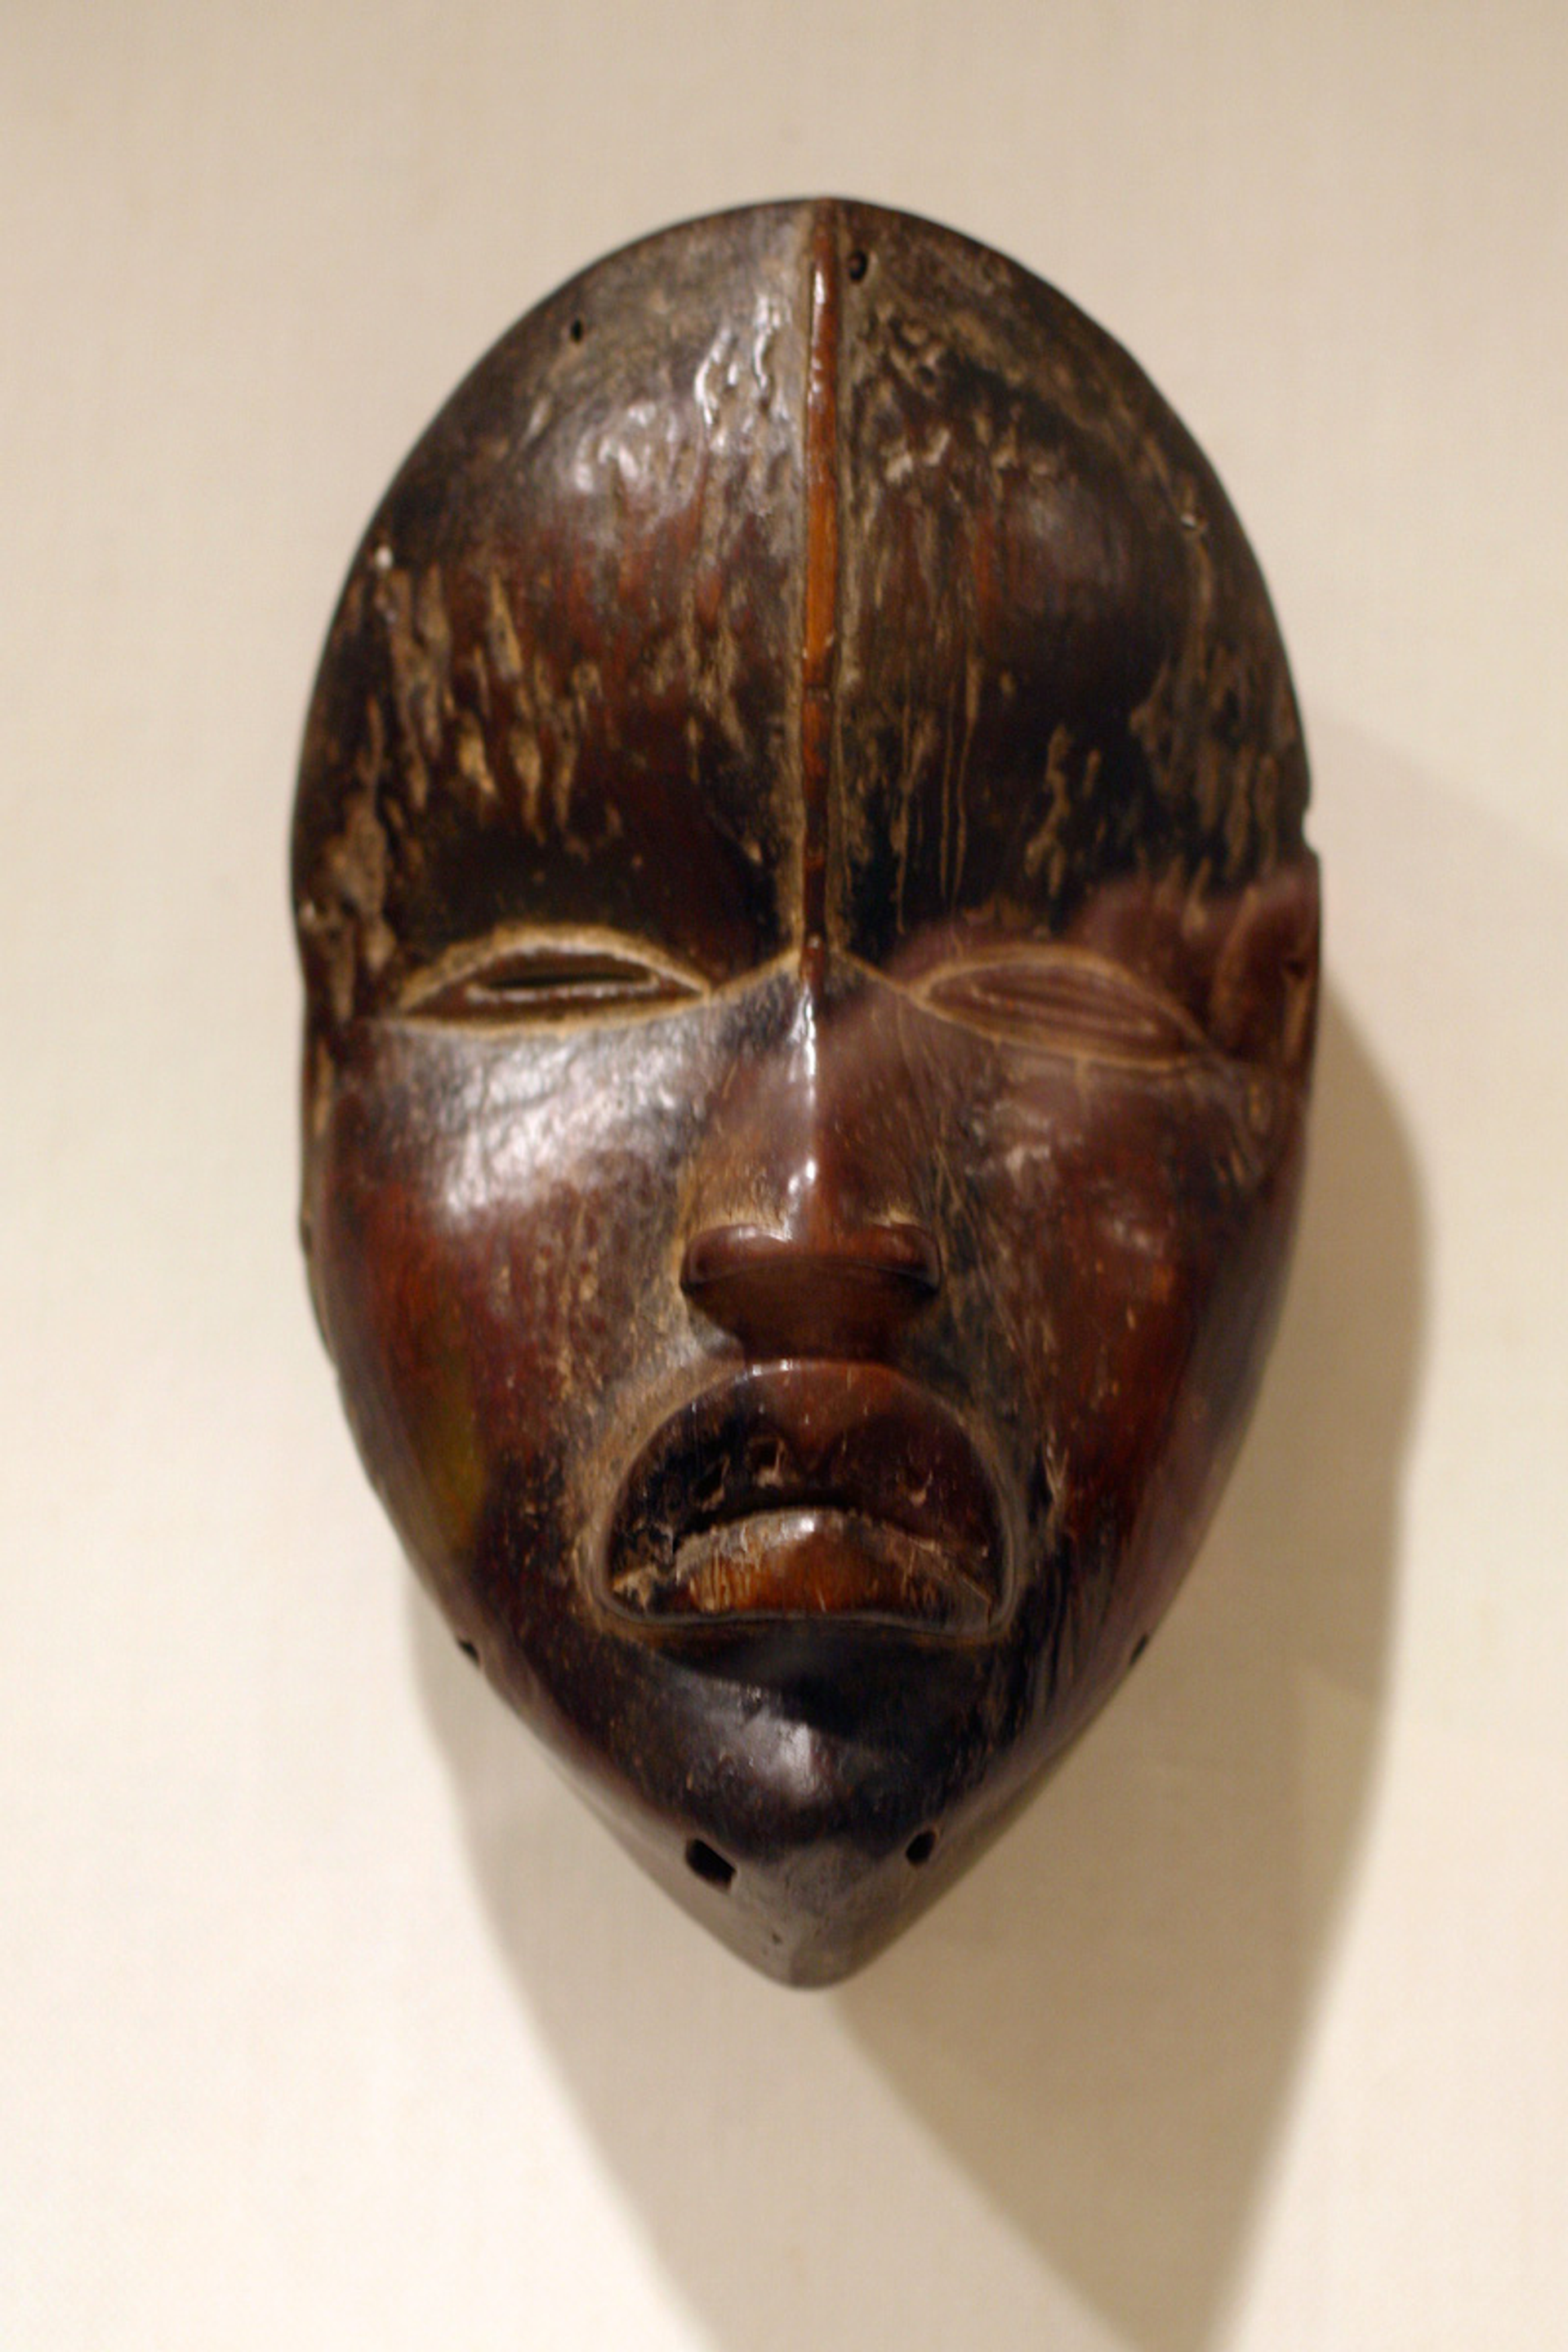 A brown, wooden mask from the Dan tribe of West Africa